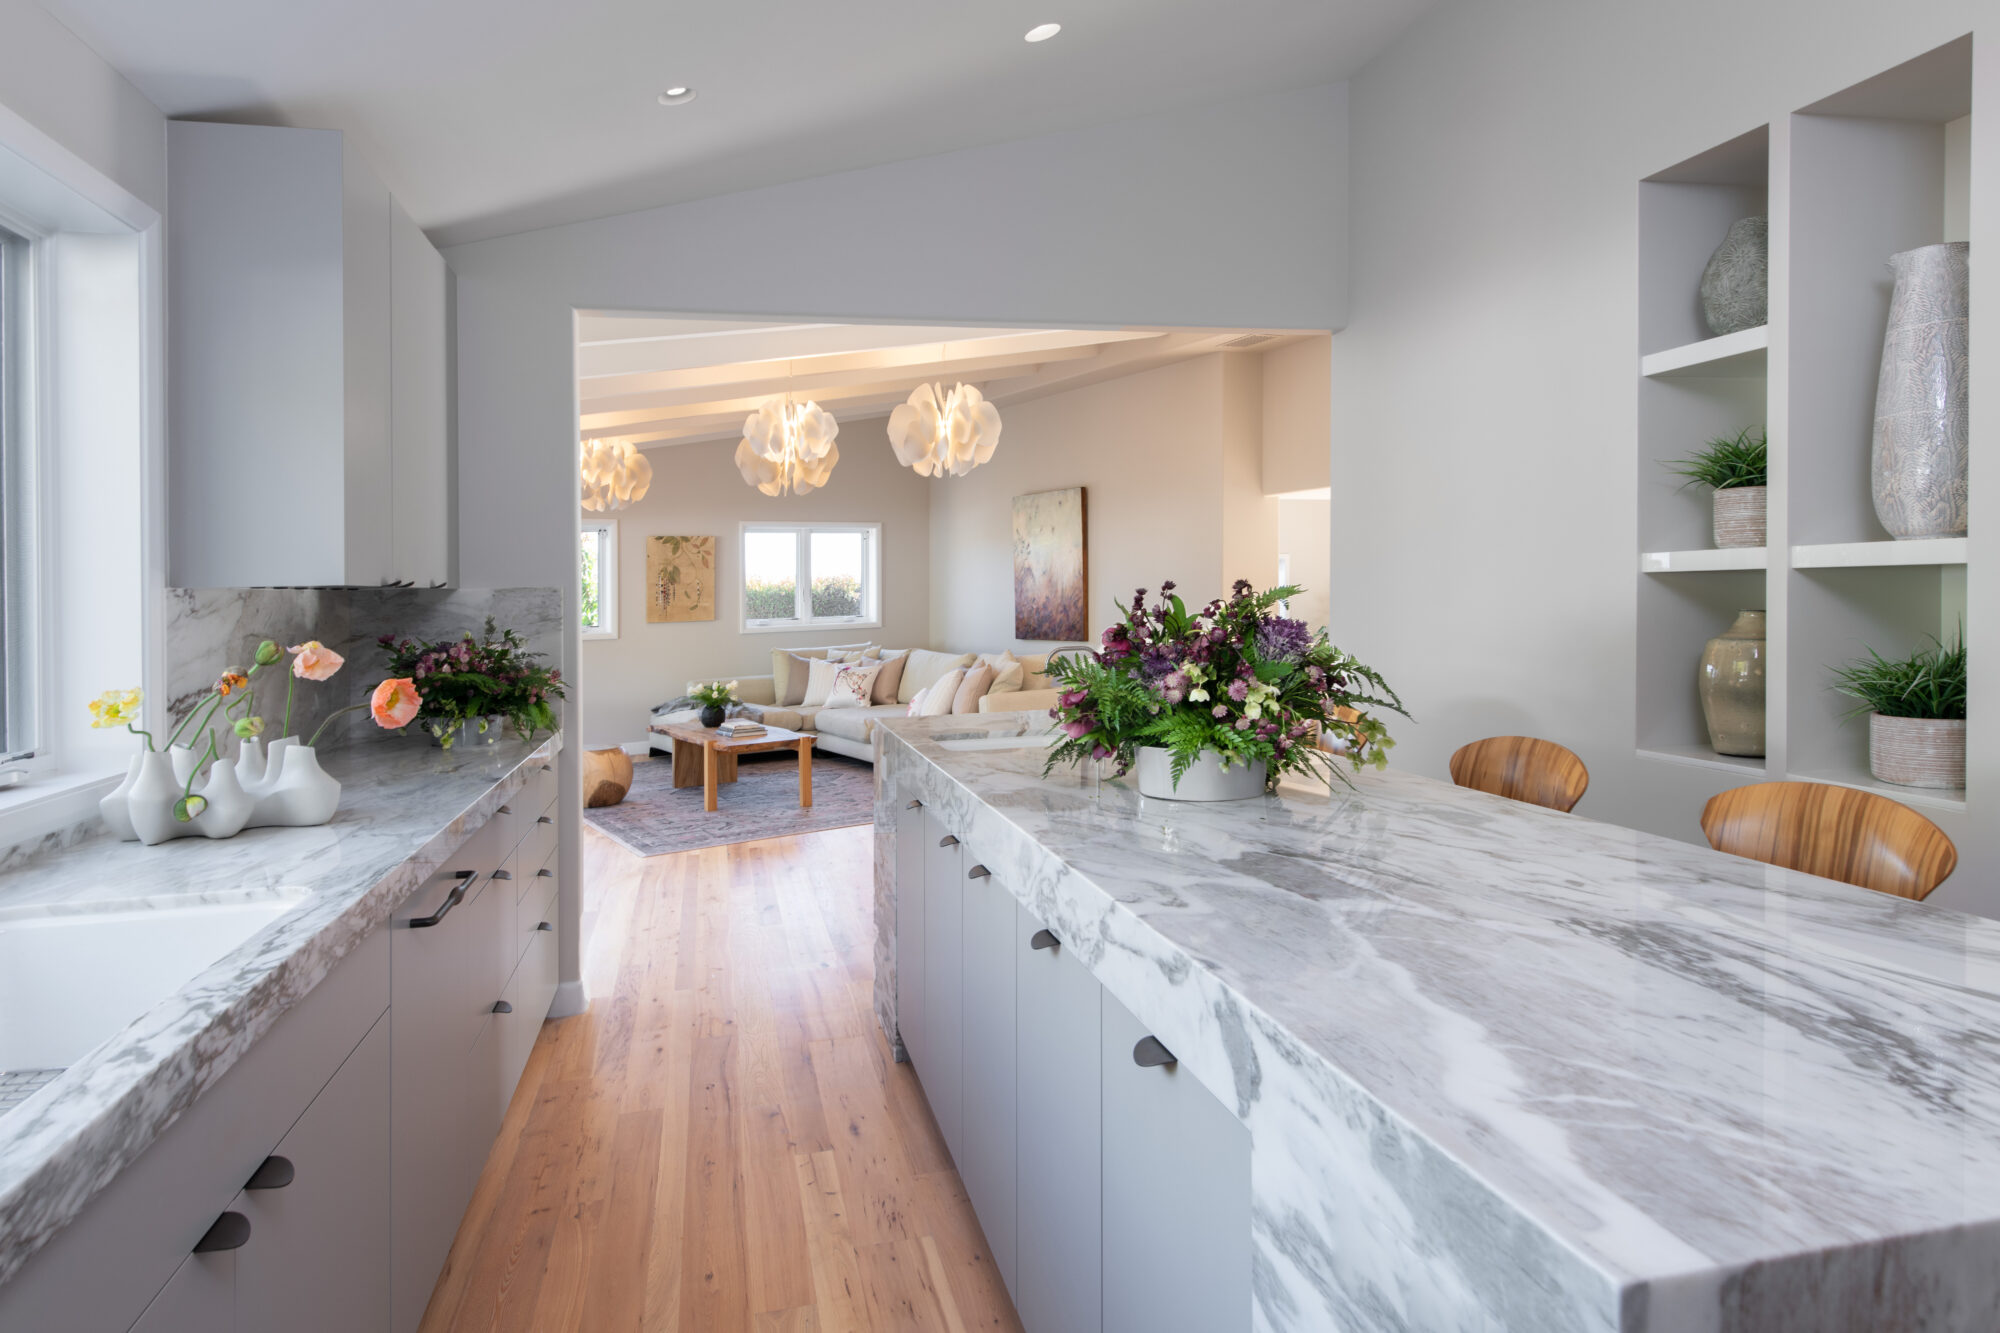 sarah barnard open kitchen with white stone island looking into living area